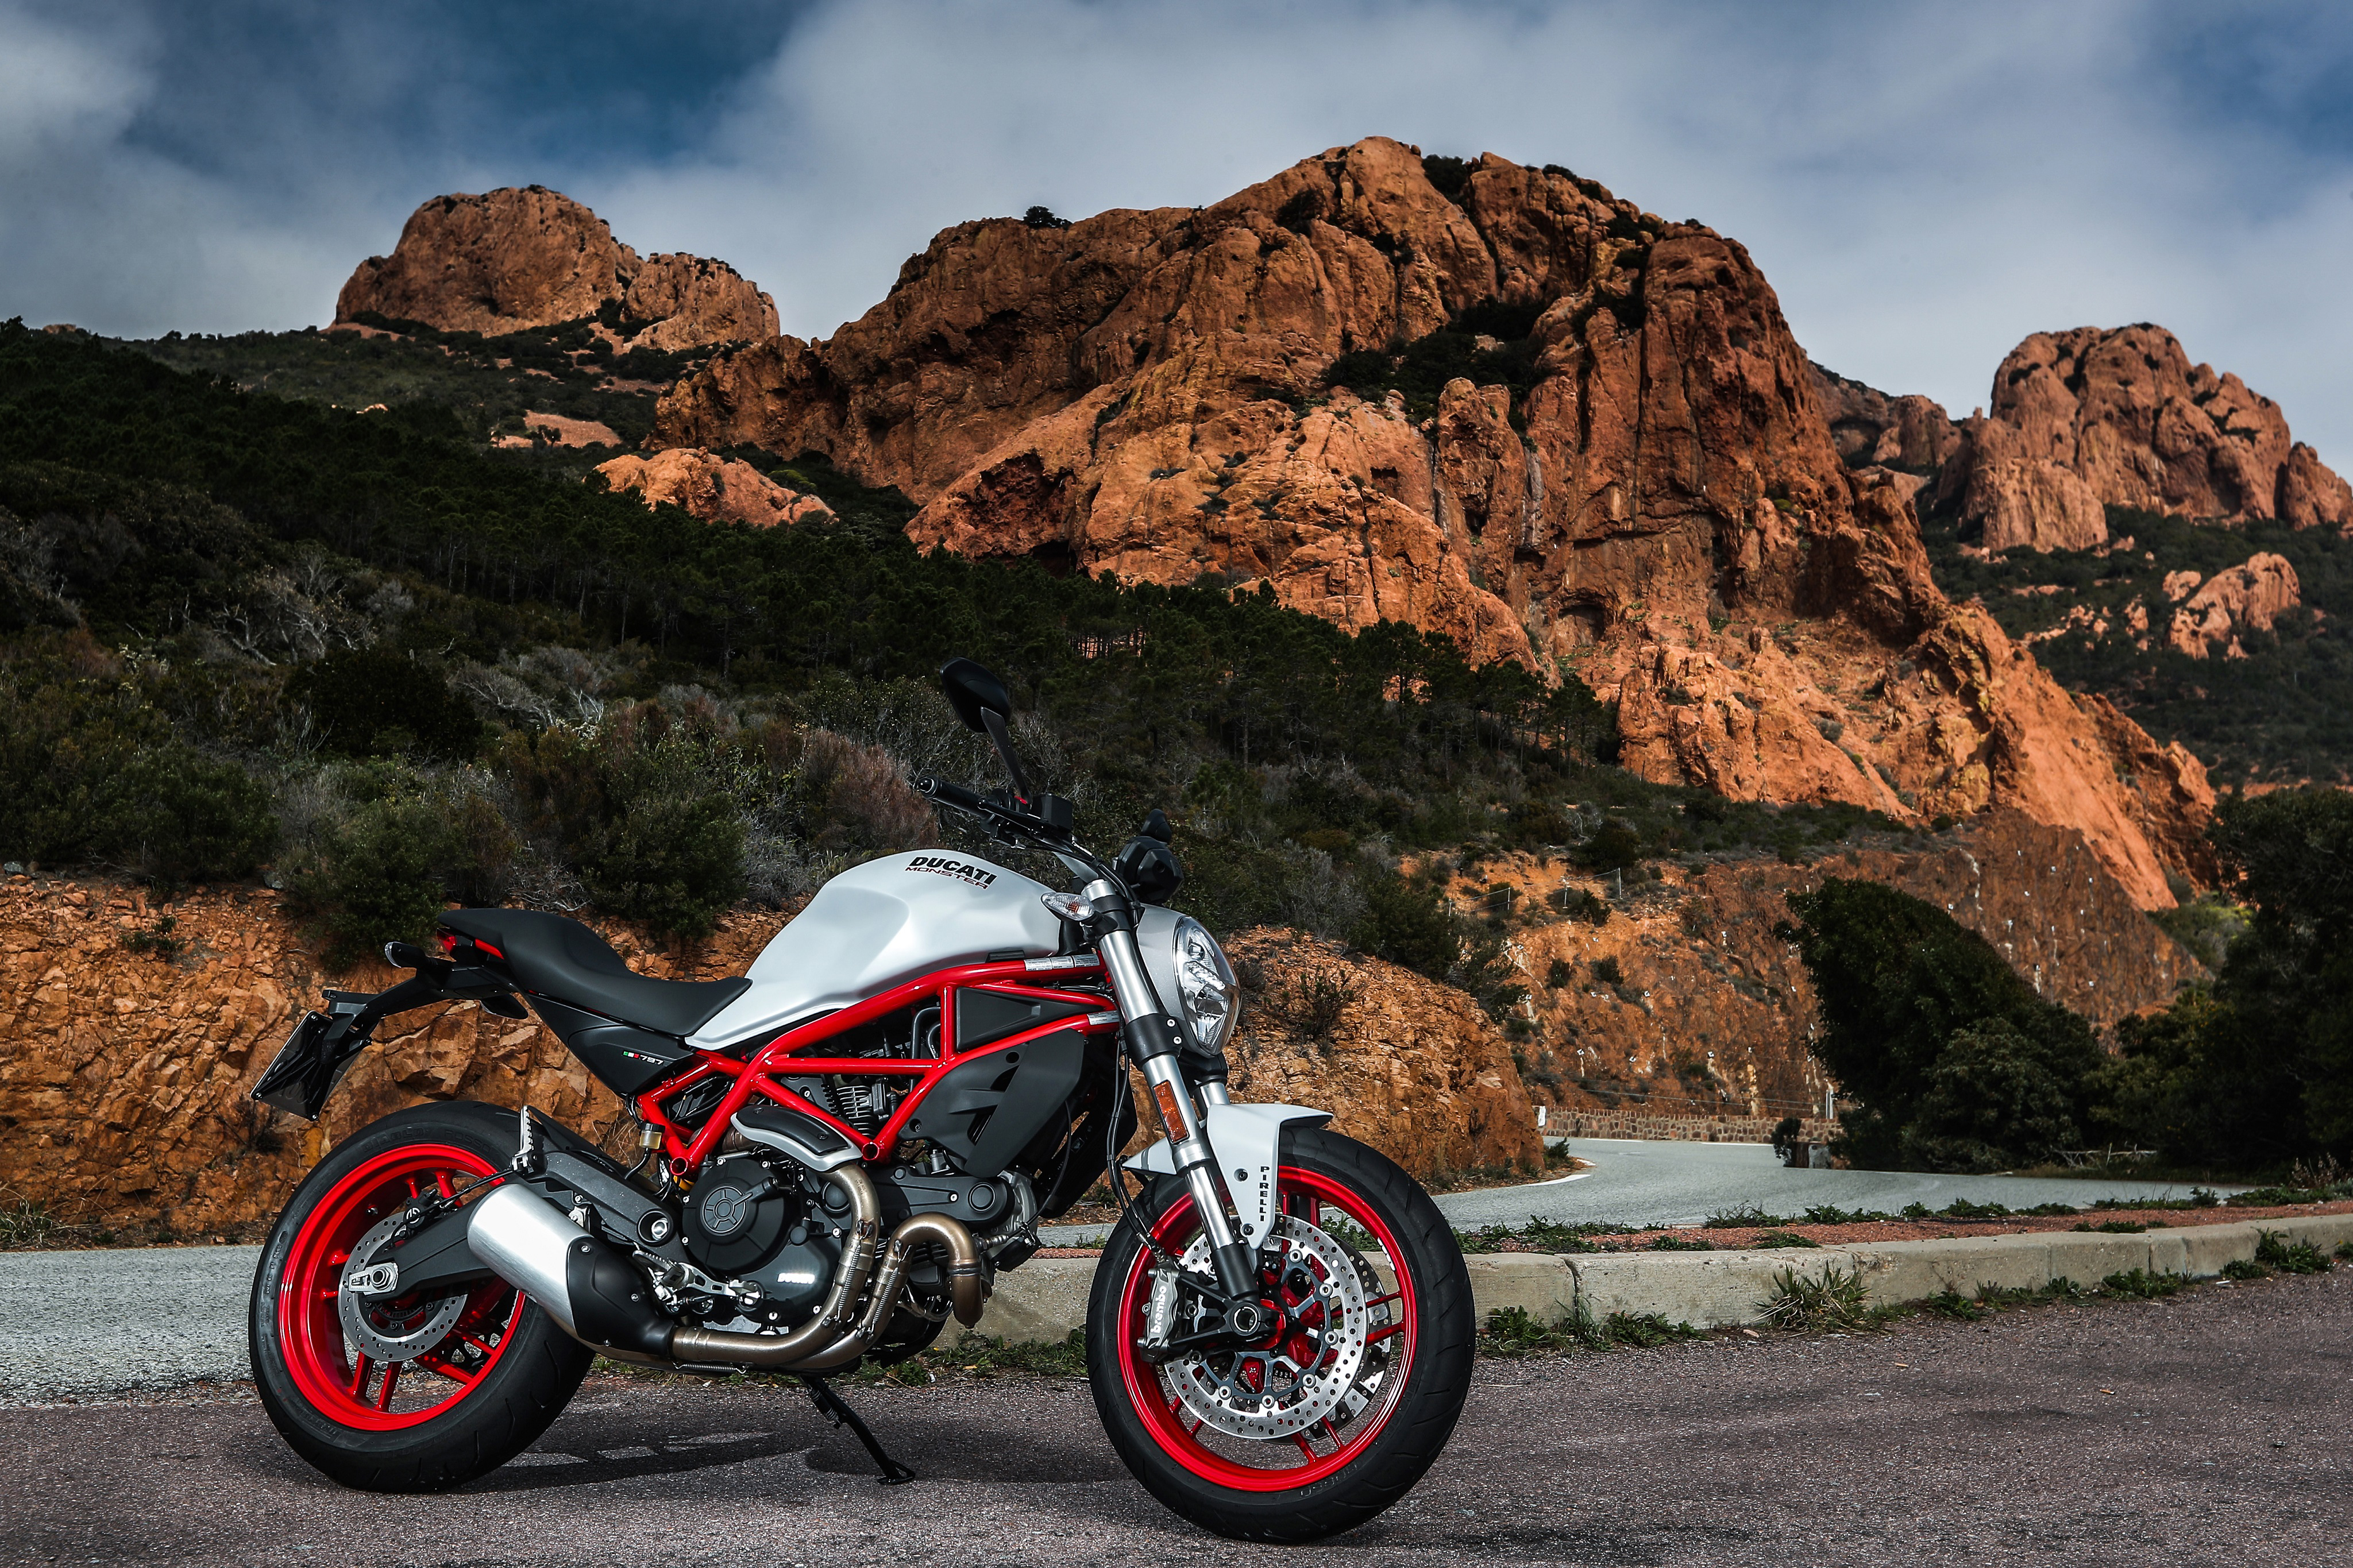 1920x1080 Background vehicles, ducati monster, ducati, motorcycle